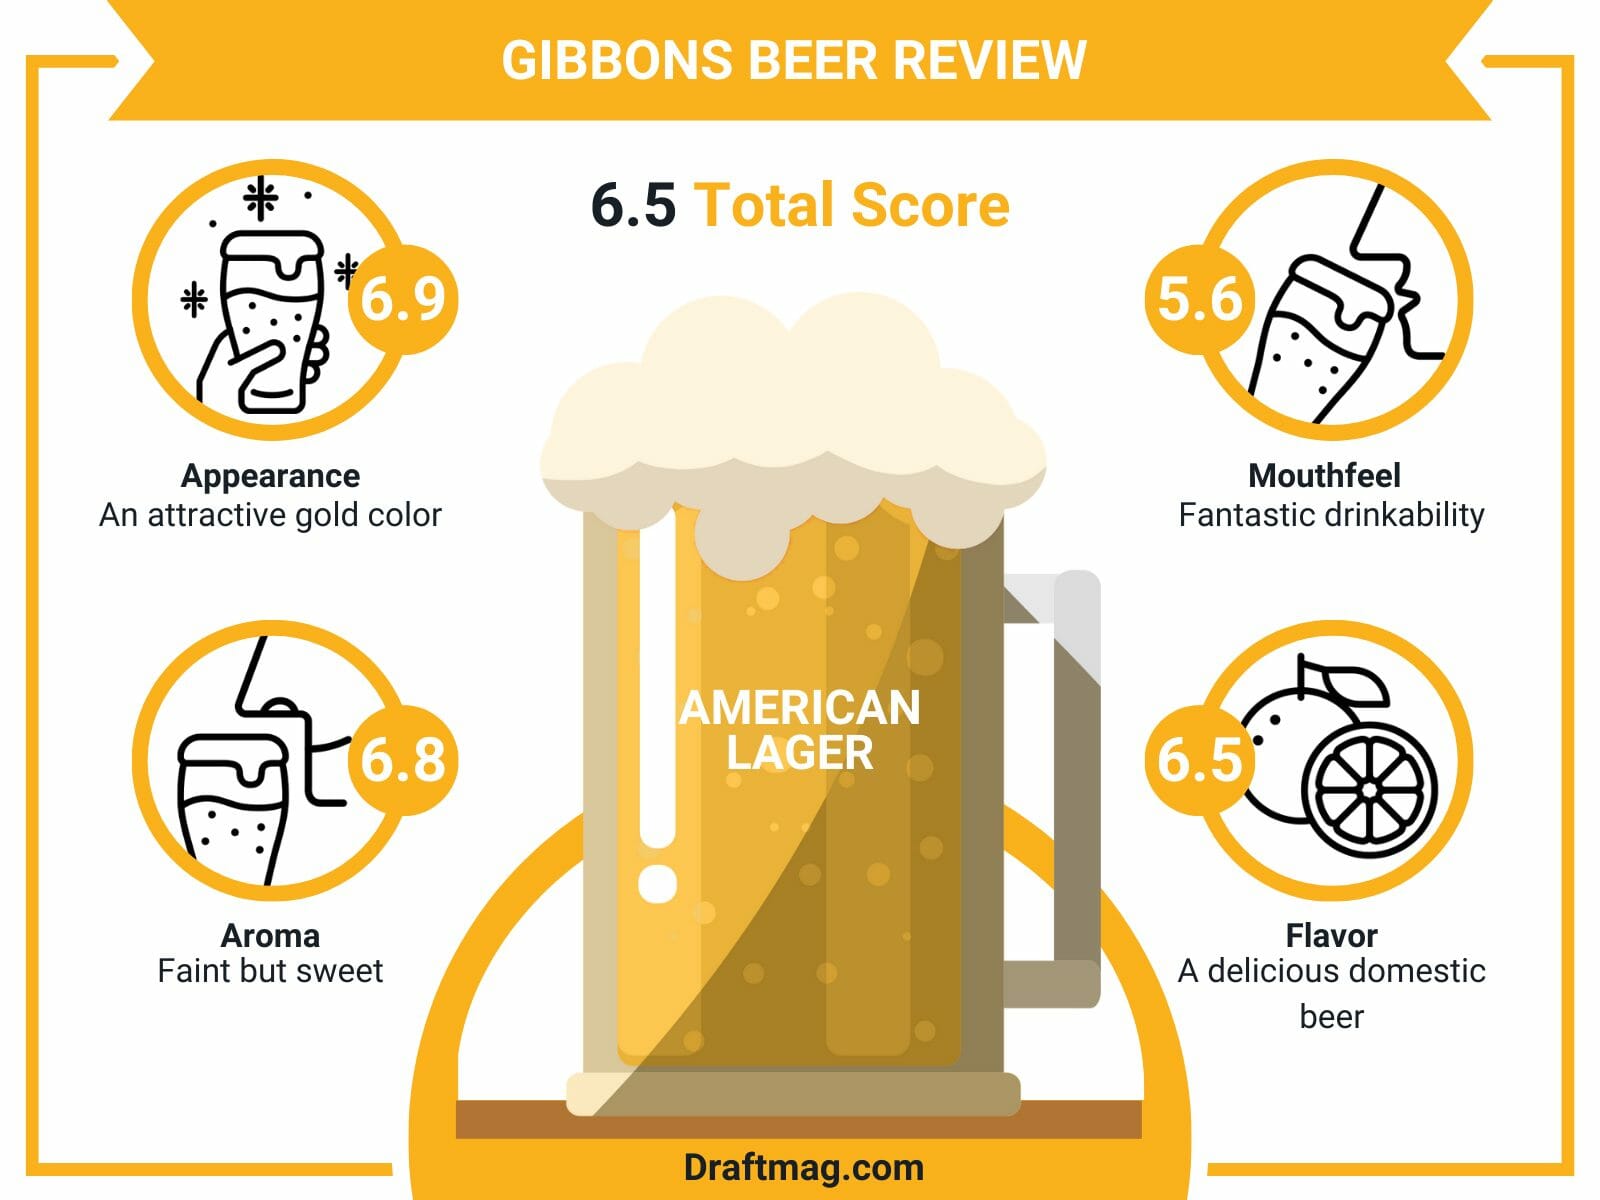 Gibbons beer review infographic